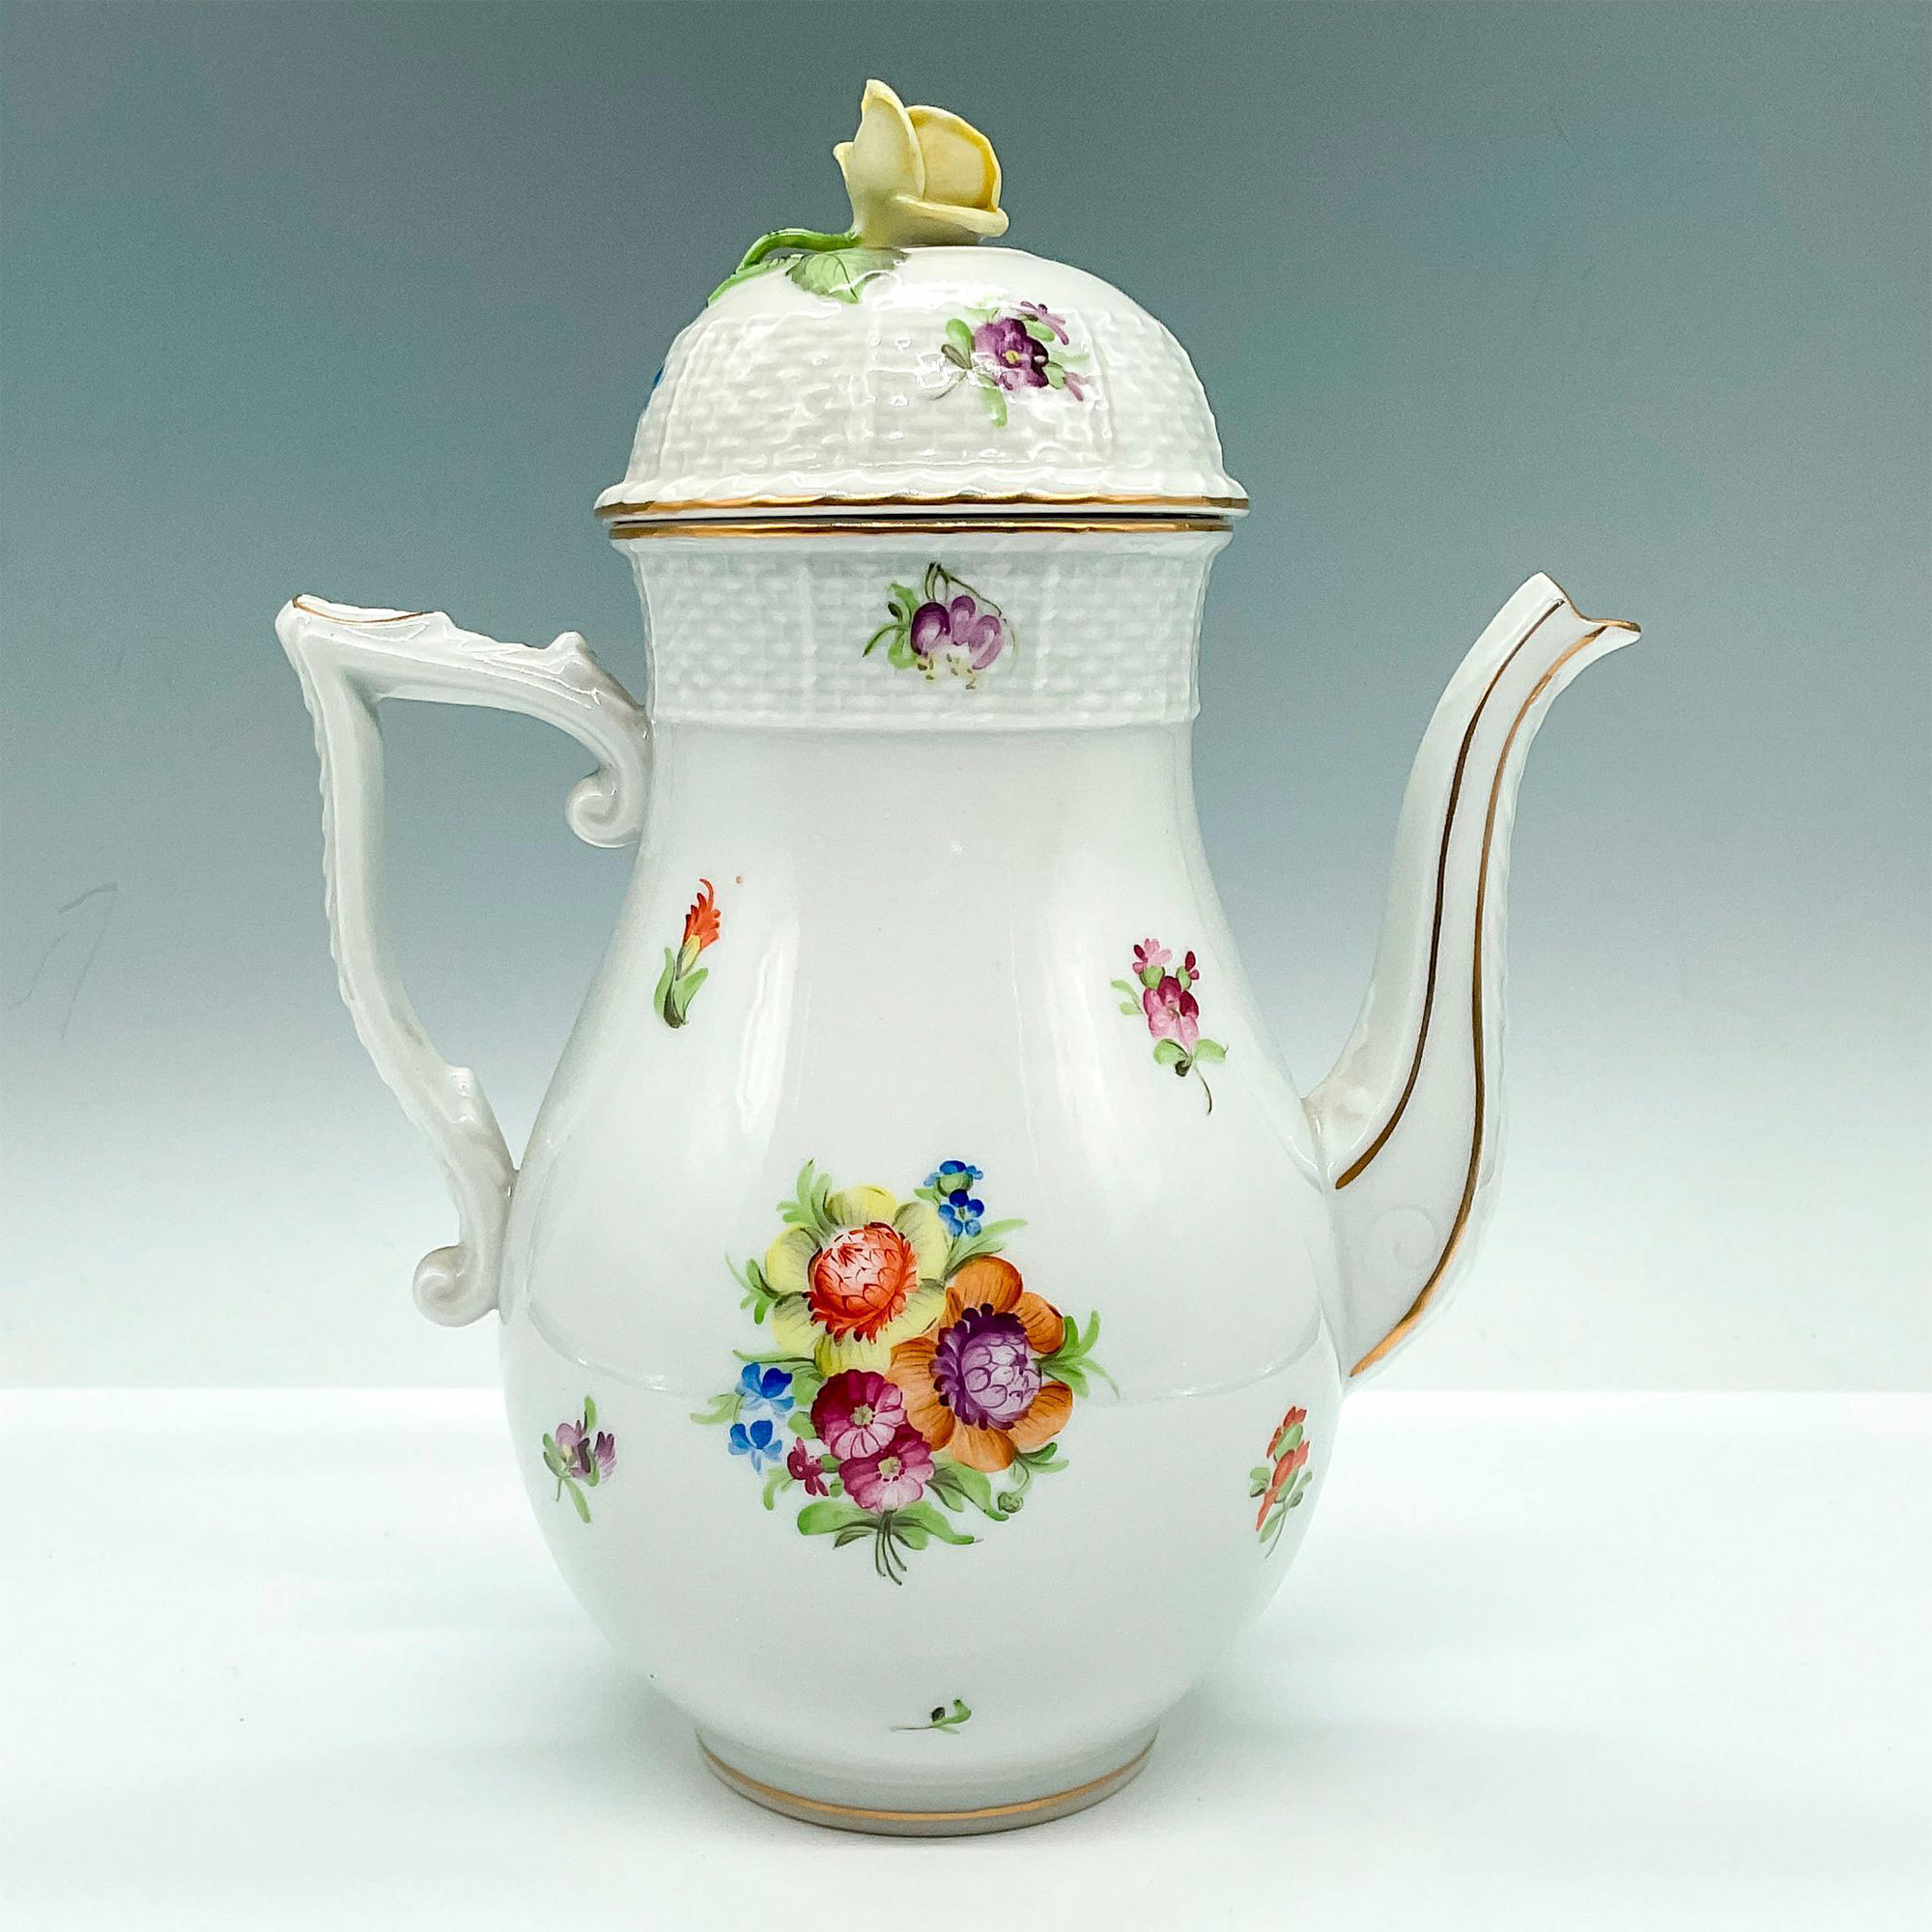 Herend Porcelain Coffee Pot - Image 2 of 3